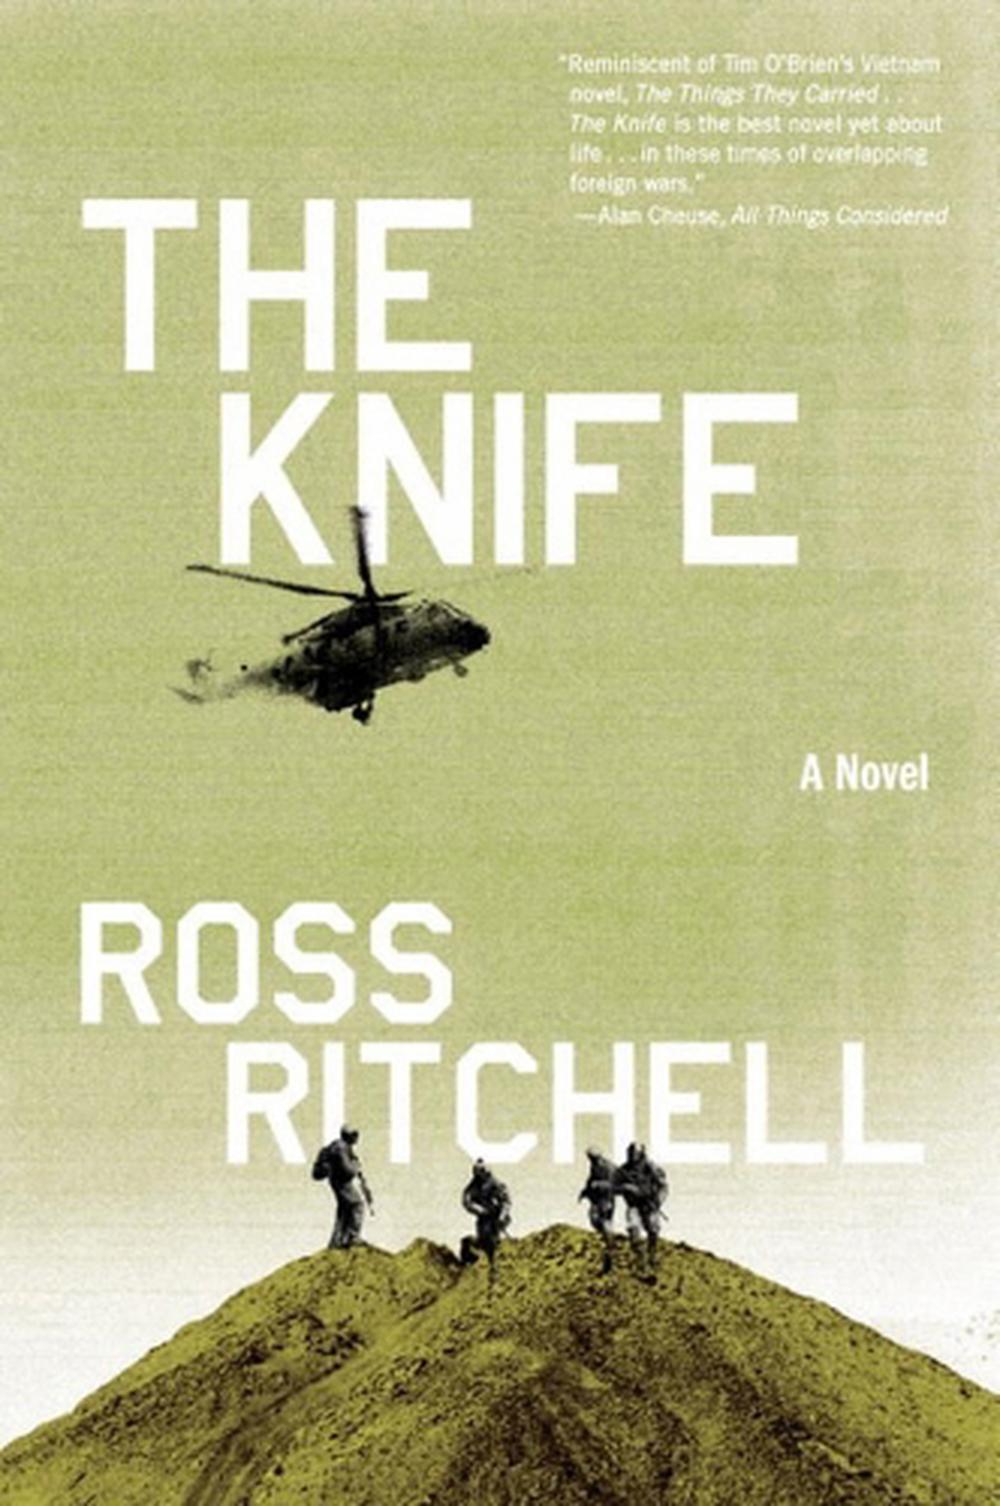 The Knife: A Novel by Ross Ritchell (English) Paperback Book Free Shipping! - Photo 1/1